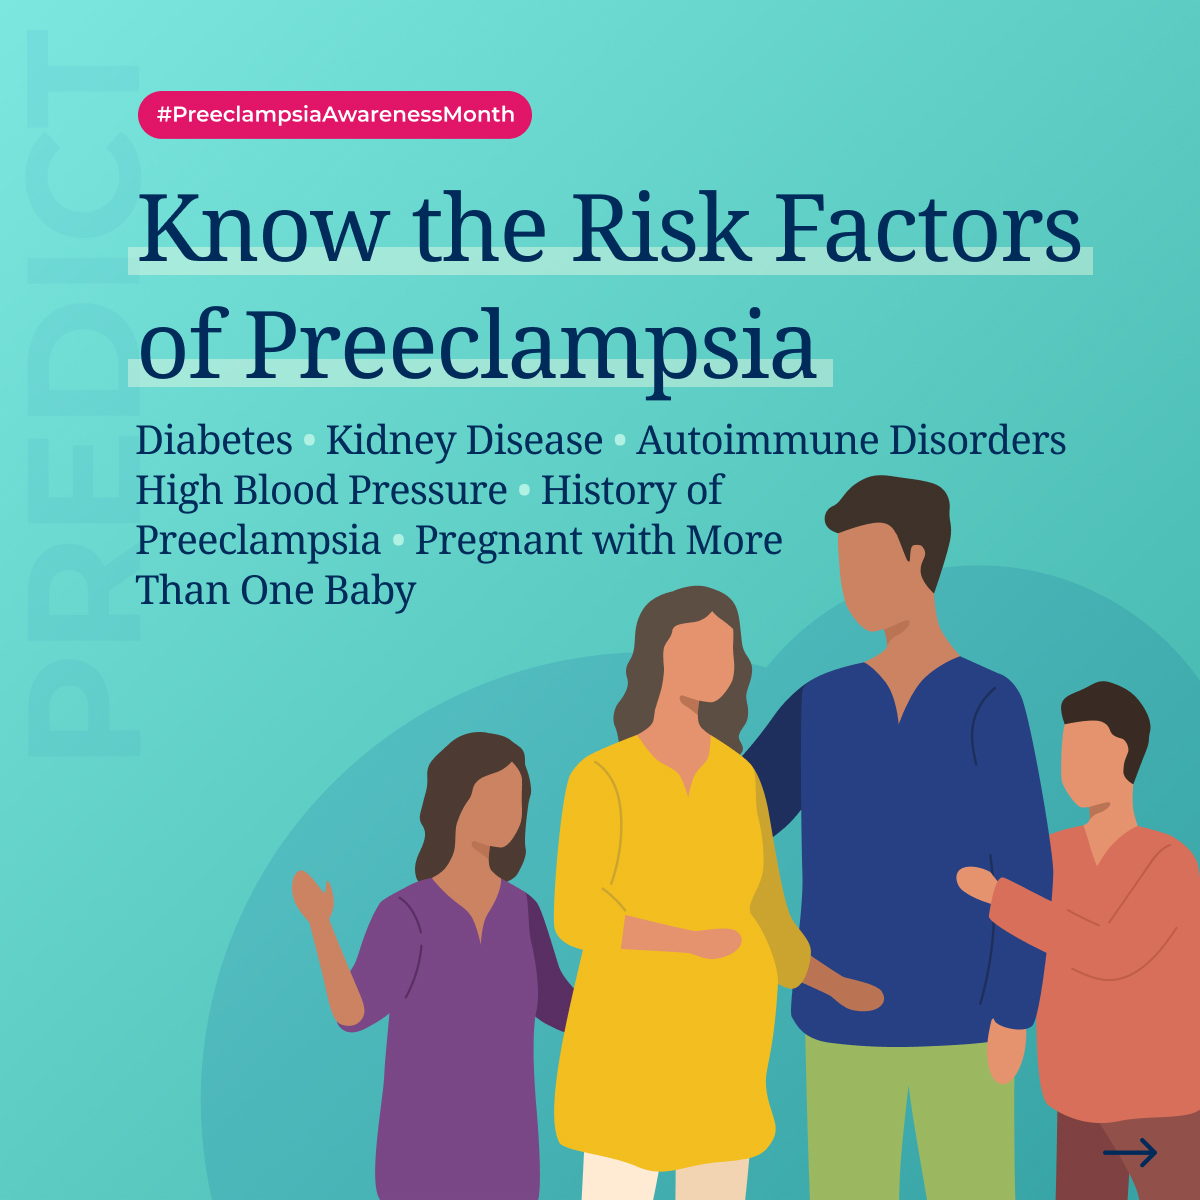 Preeclampsia rates are on the rise in the US and are a leading cause of maternal and infant illness and death. All women need to know the risk factors for developing high blood pressure during pregnancy. preeclampsia.org/aspirin #PreeclampsiaAwarenessMonth